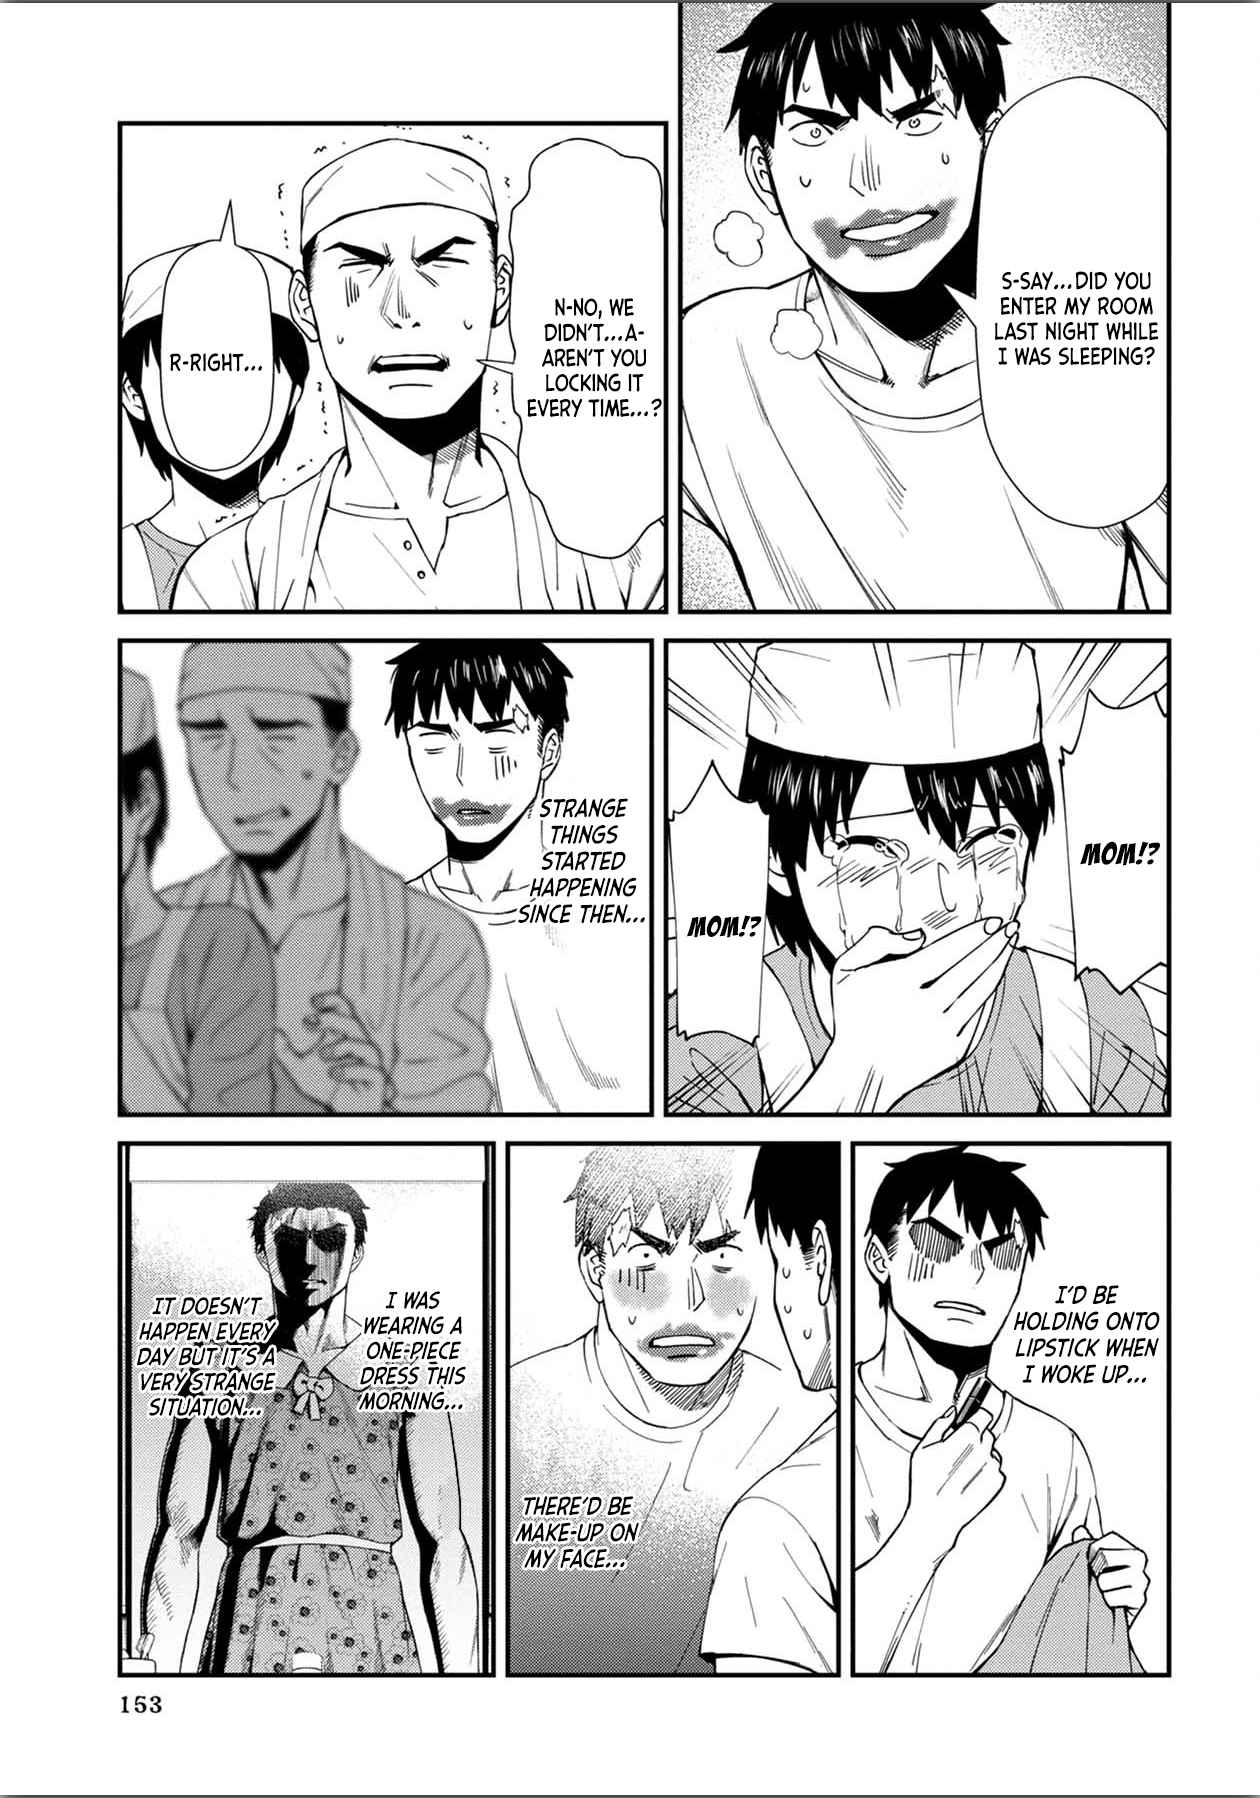 Furyou Taimashi Reina Vol. 1 Ch. 9 Exorcism #9 Dealing With The Delinquent (Part 1)